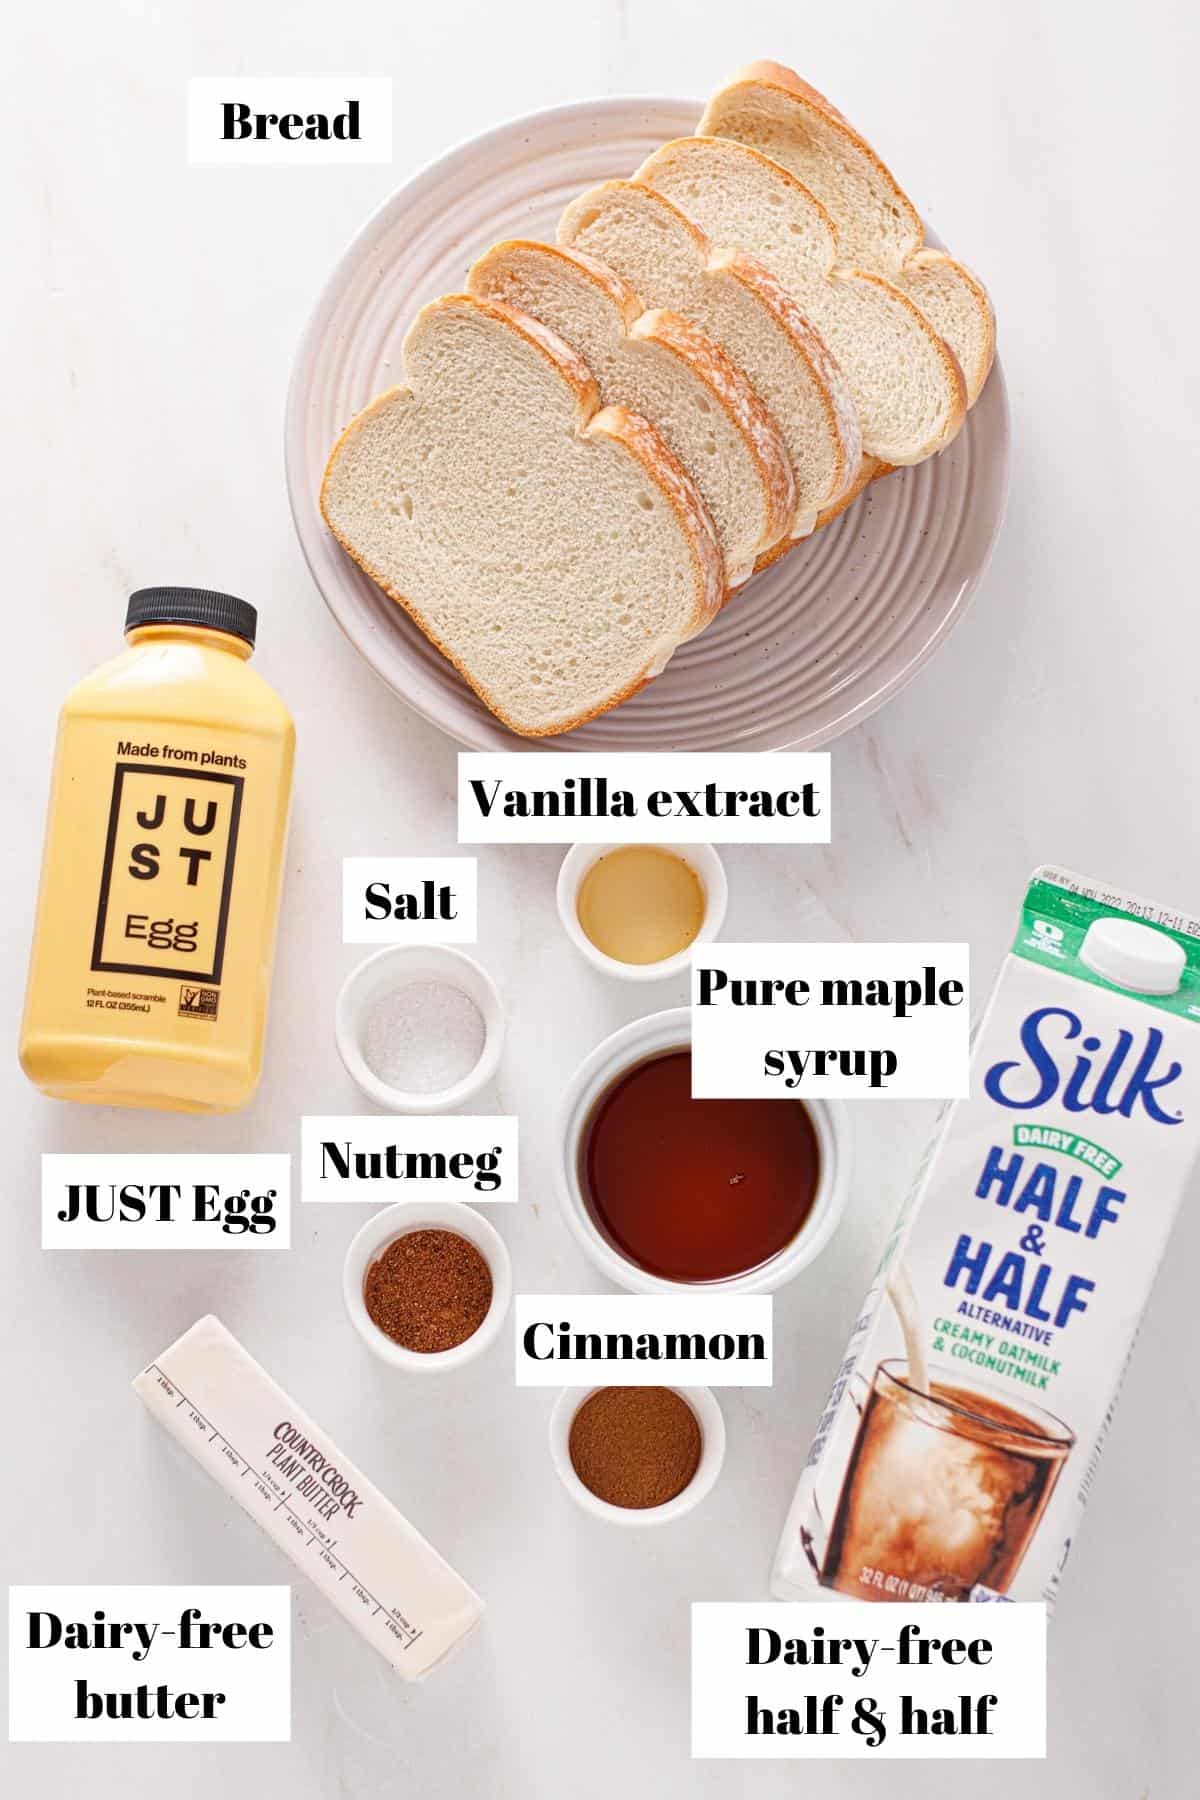 Ingredients to make JUST Egg French toast.